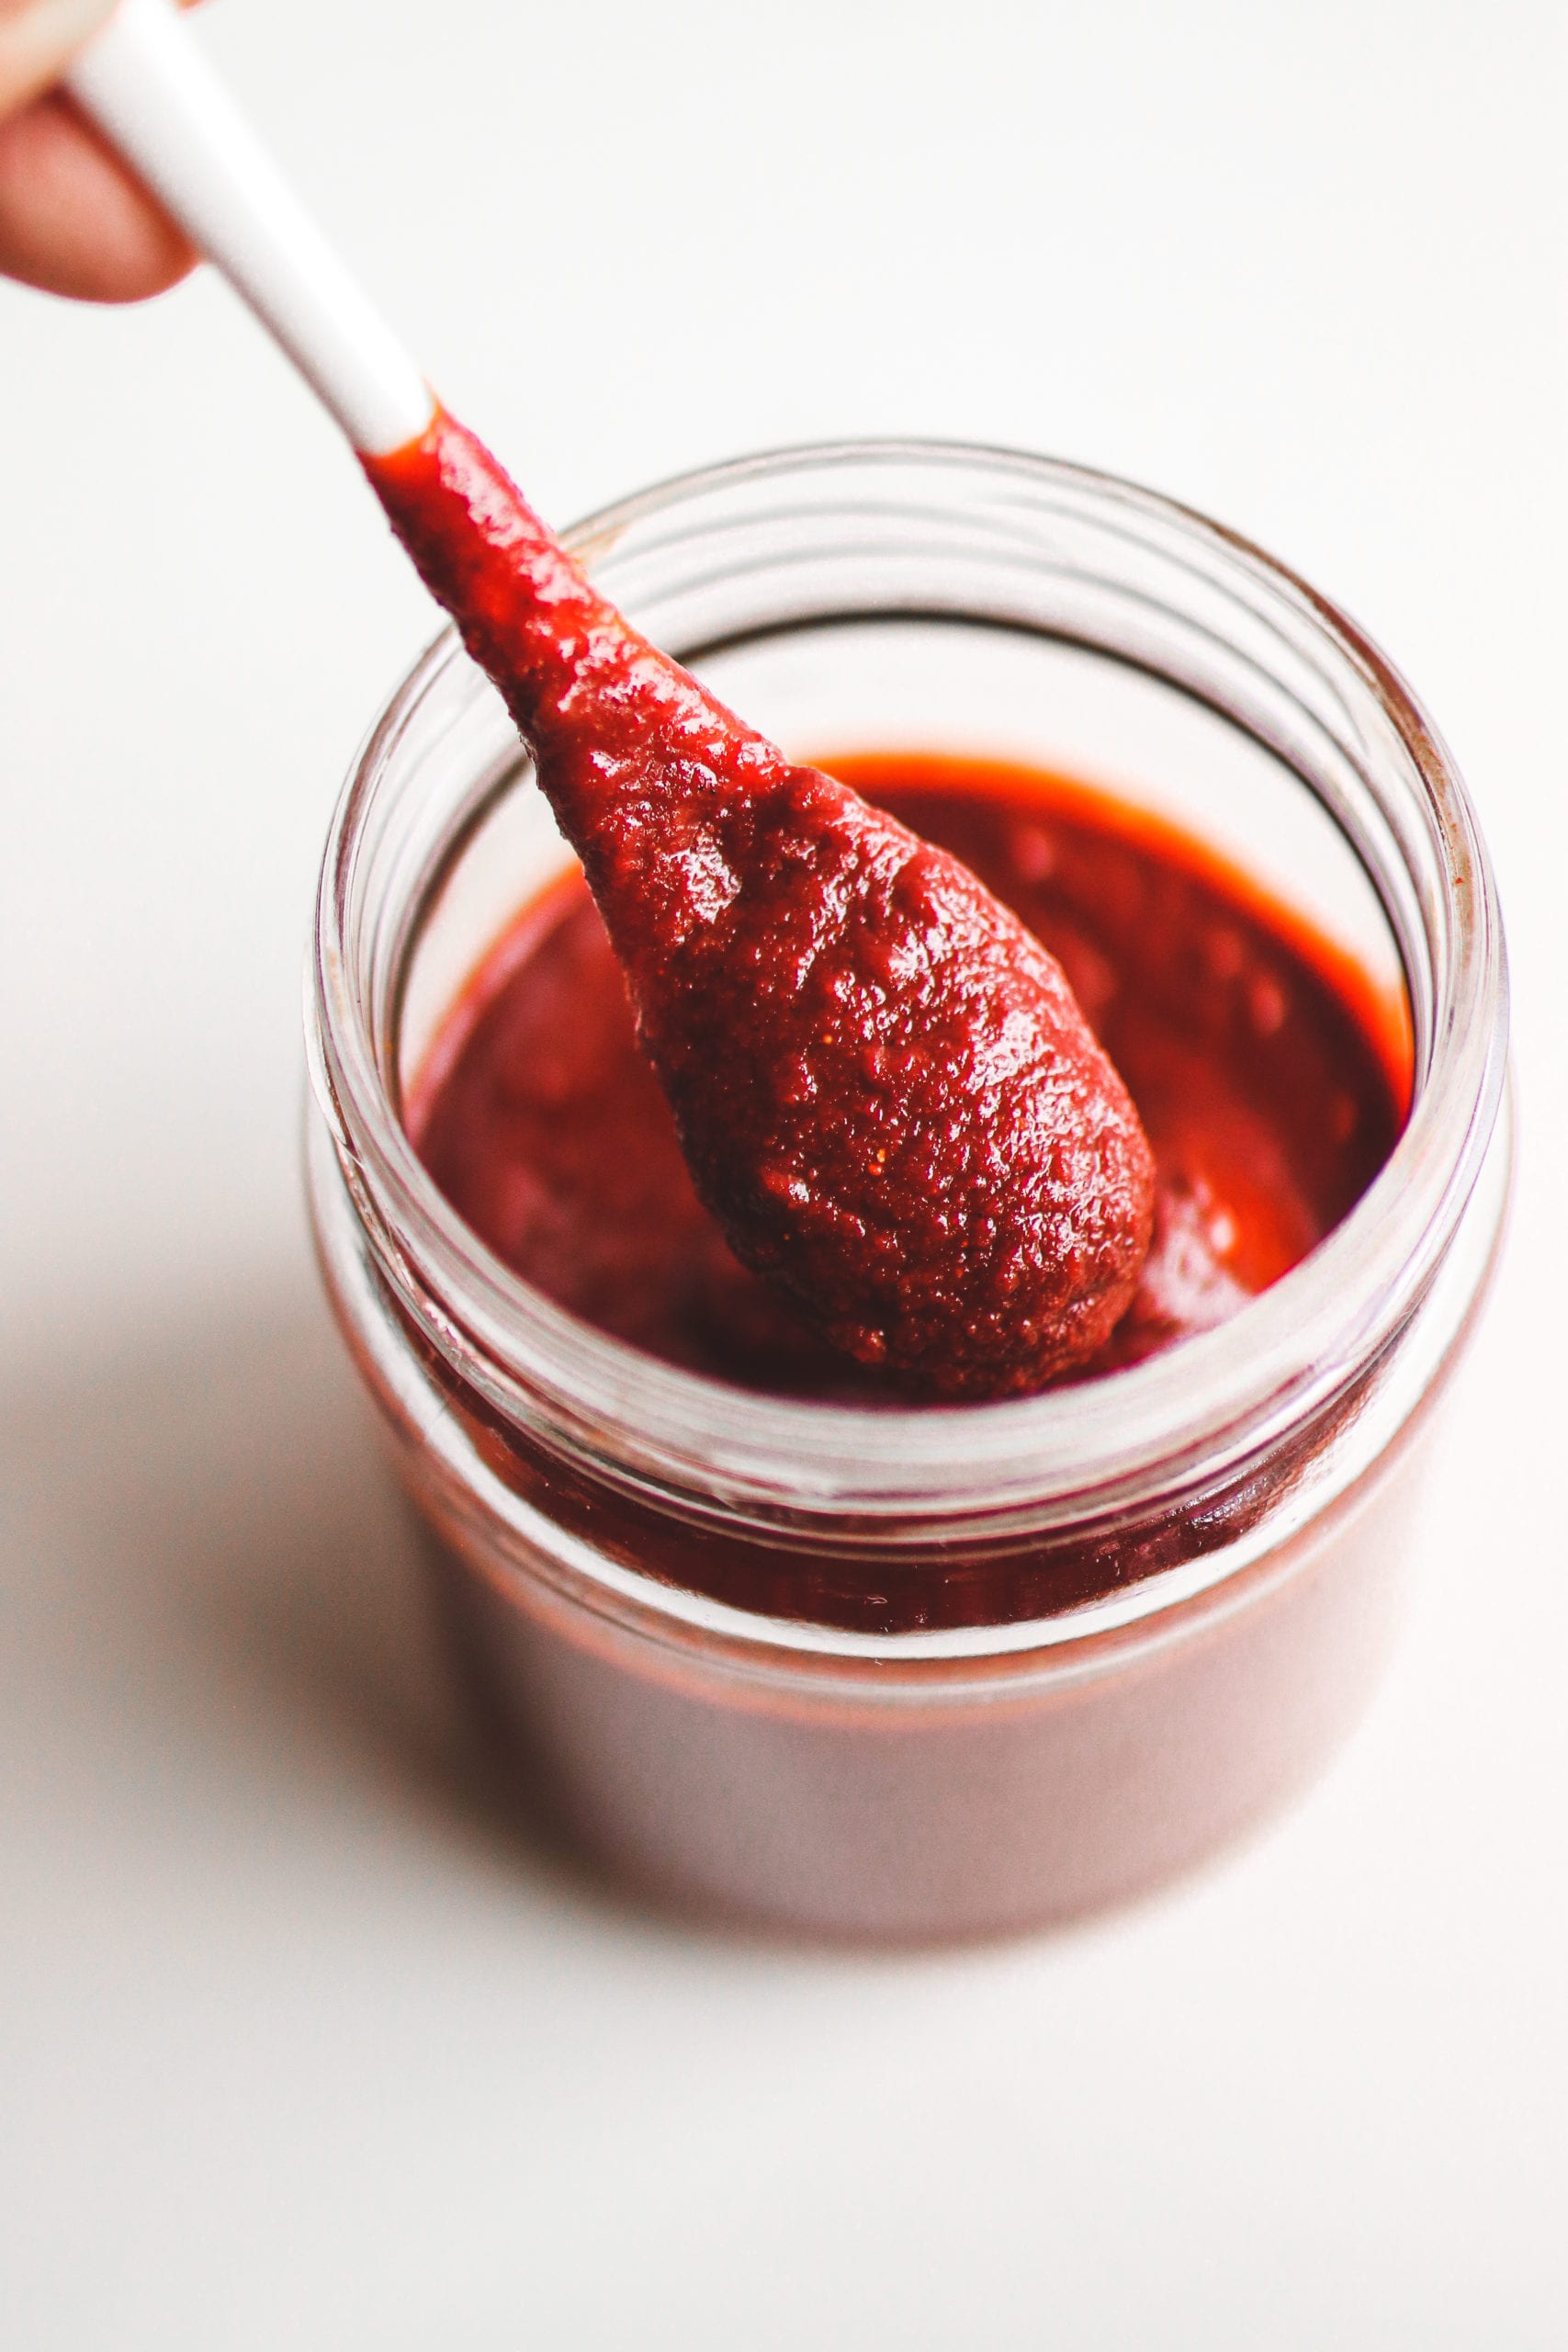 a white spoon dipping into a glass jar filled with korean chili paste (gochujang)